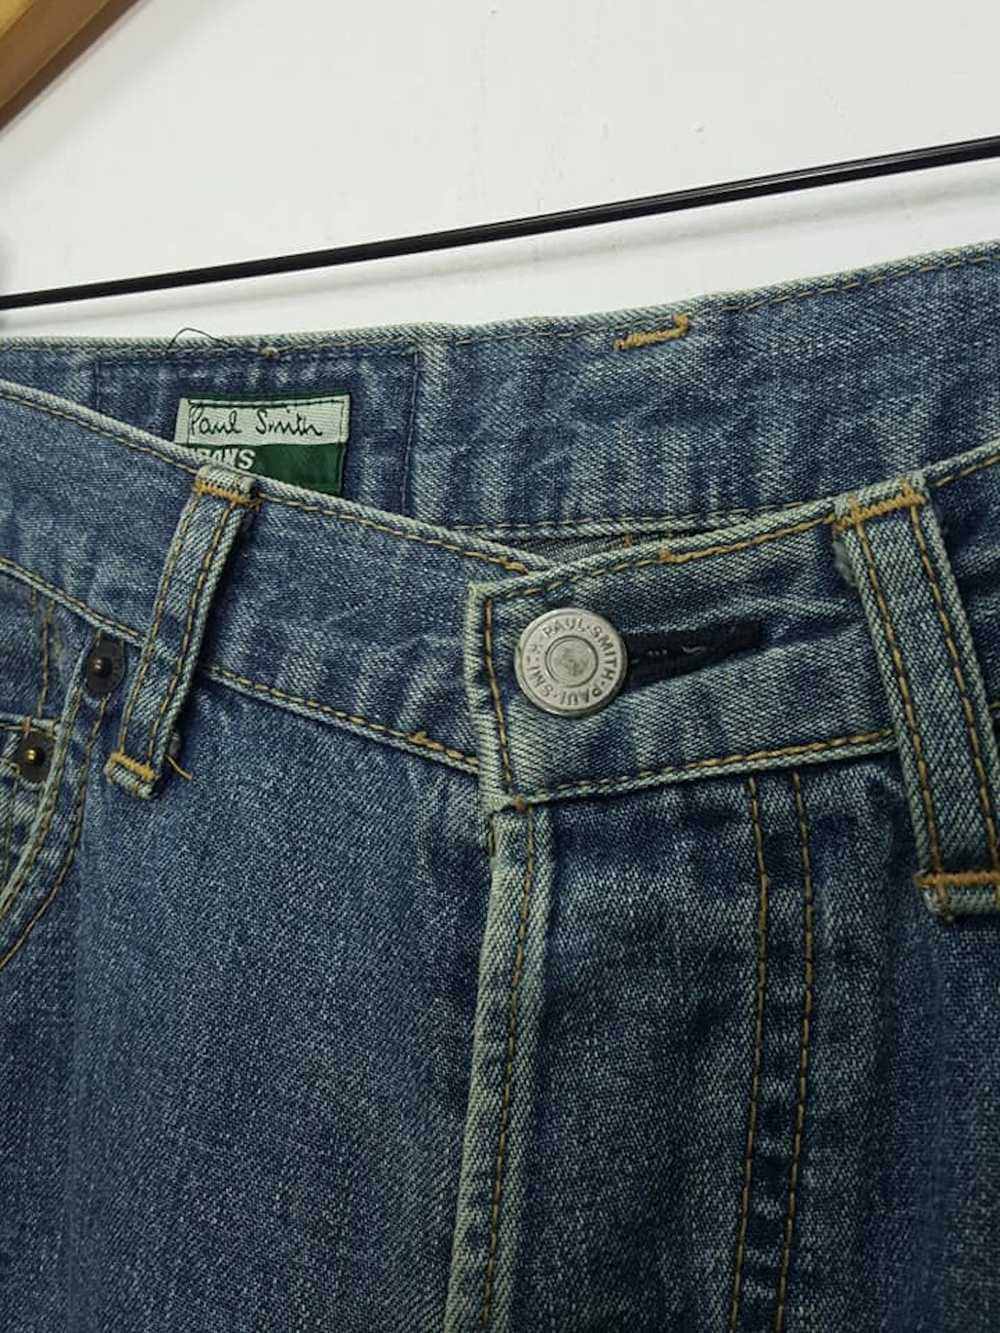 Paul Smith Paul Smith Button Fly Jeans MADE IN JA… - image 7